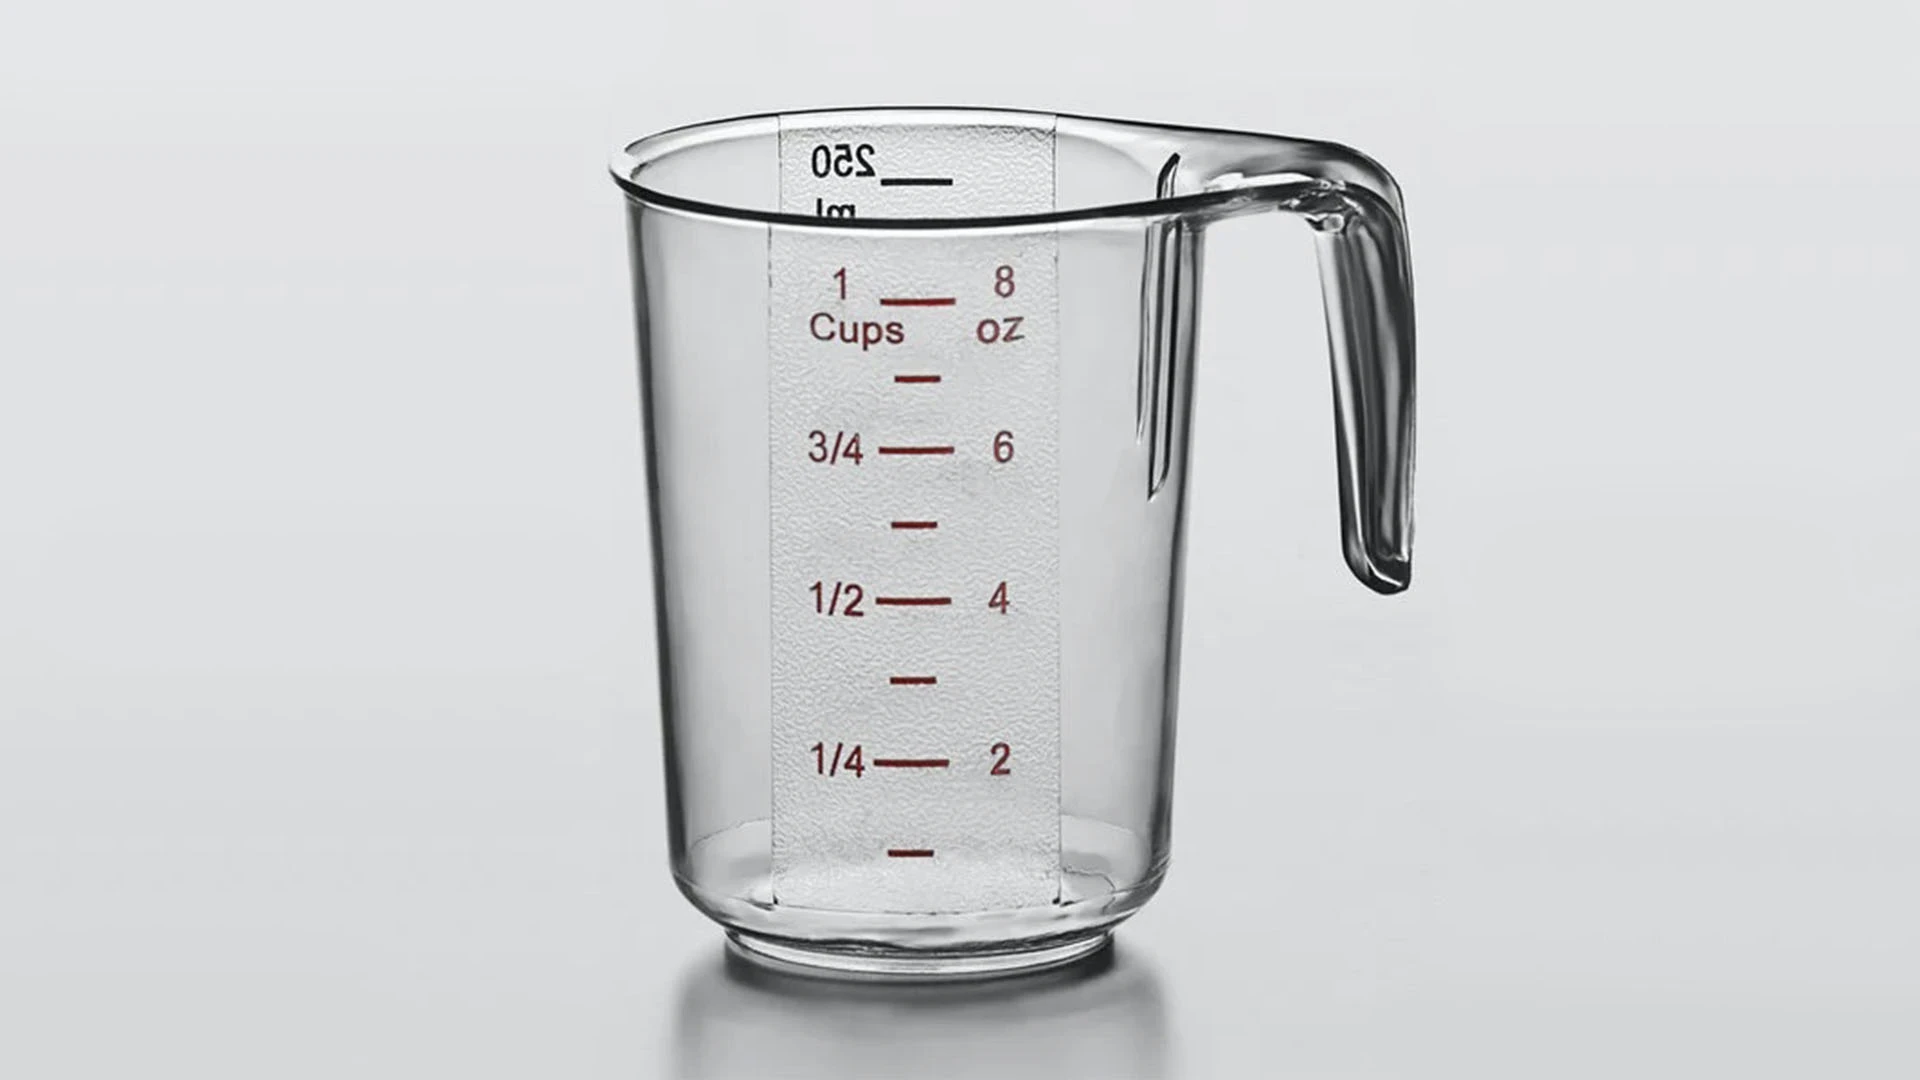 2 US fluid ounces are approximately 59.15 milliliters